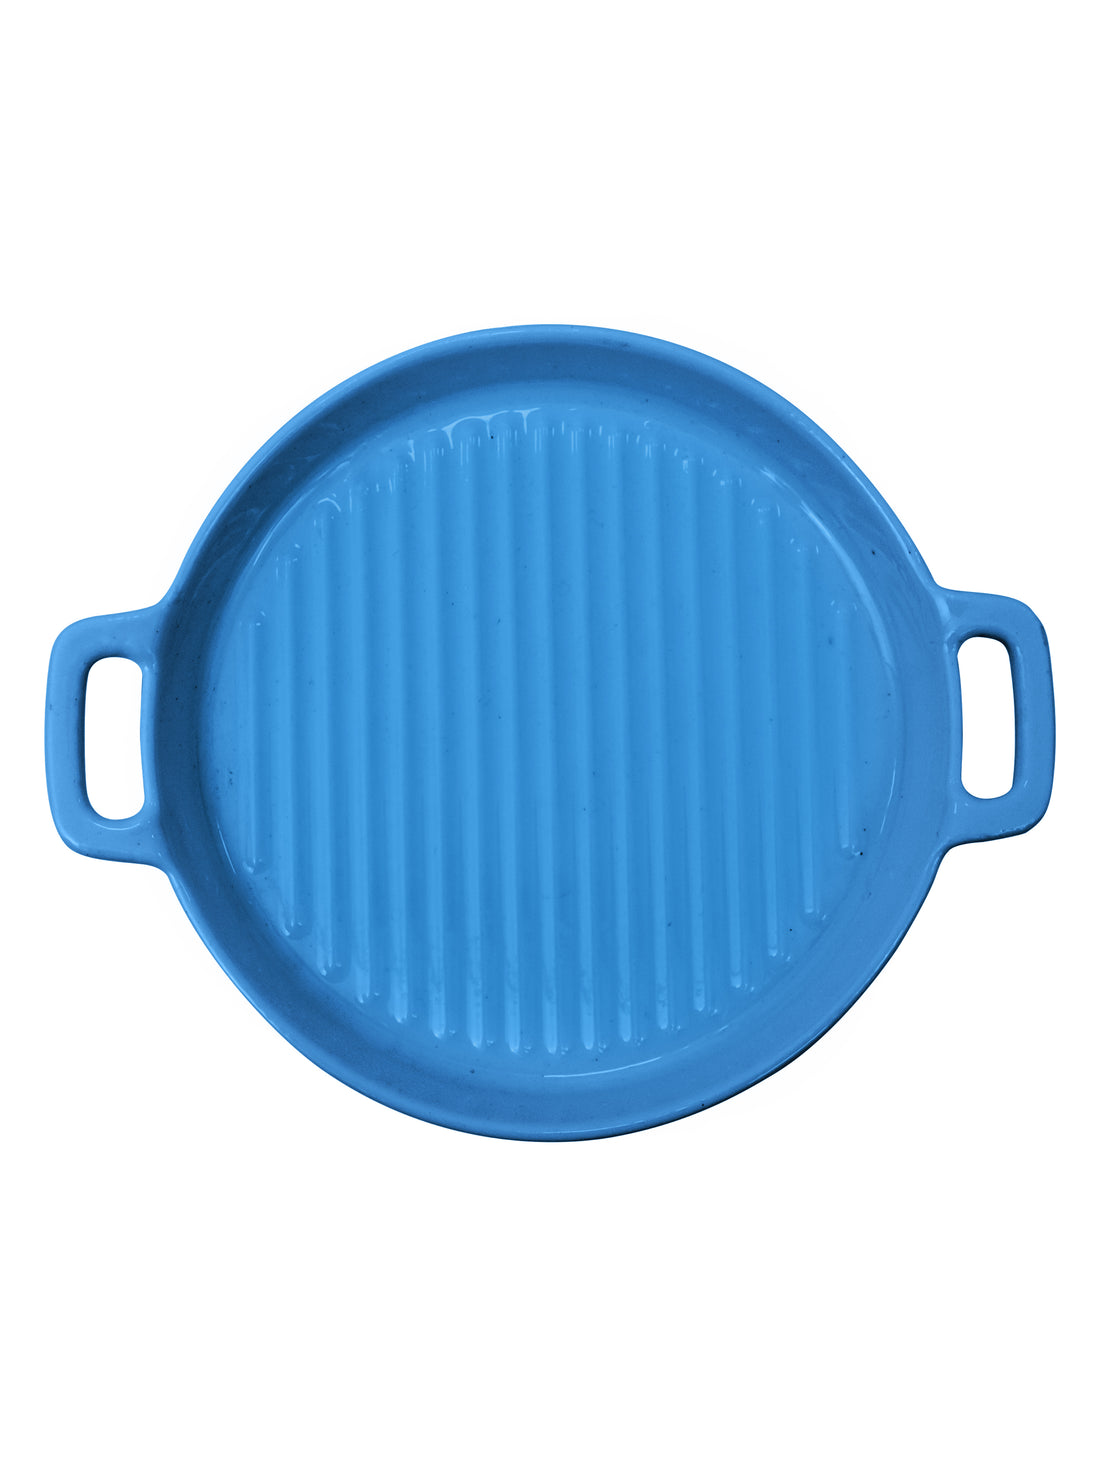 Ceramic Round with Handle Grill Plates for Serving, Blue Color